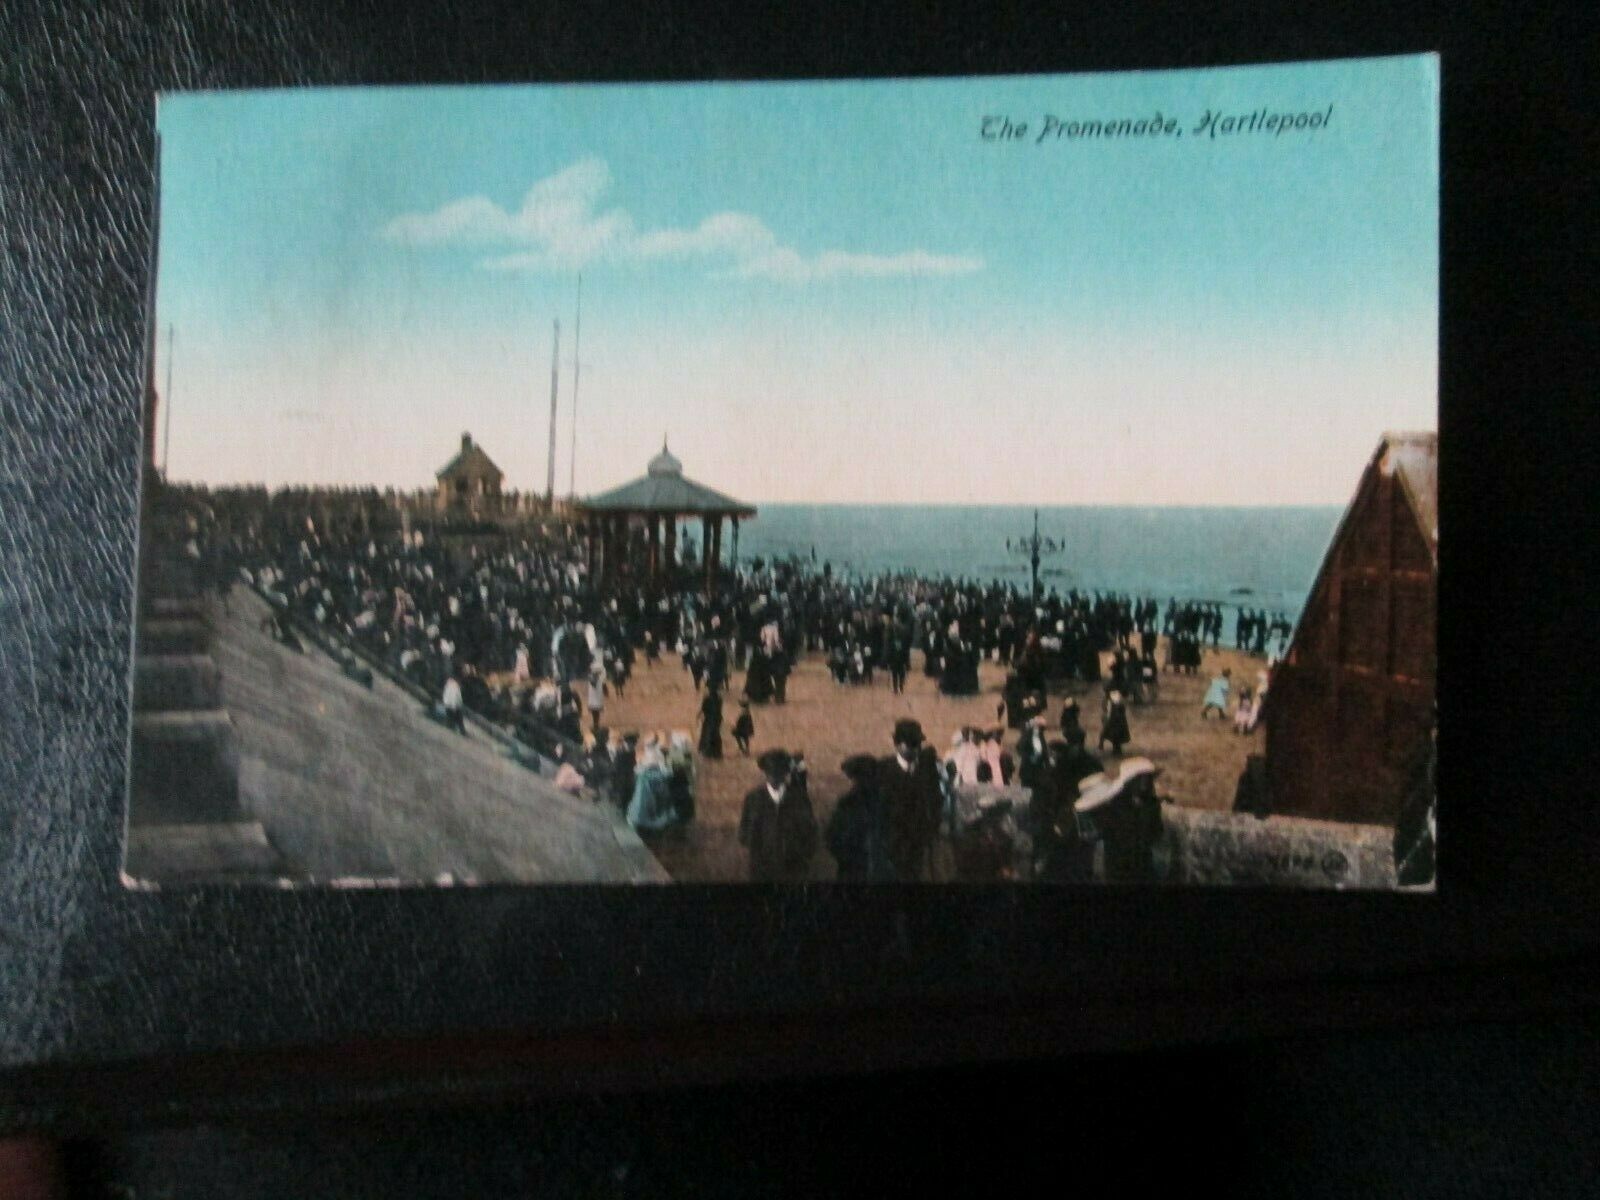 House Clearance - Service of The Promenade, Hartlepool (1919 posted)